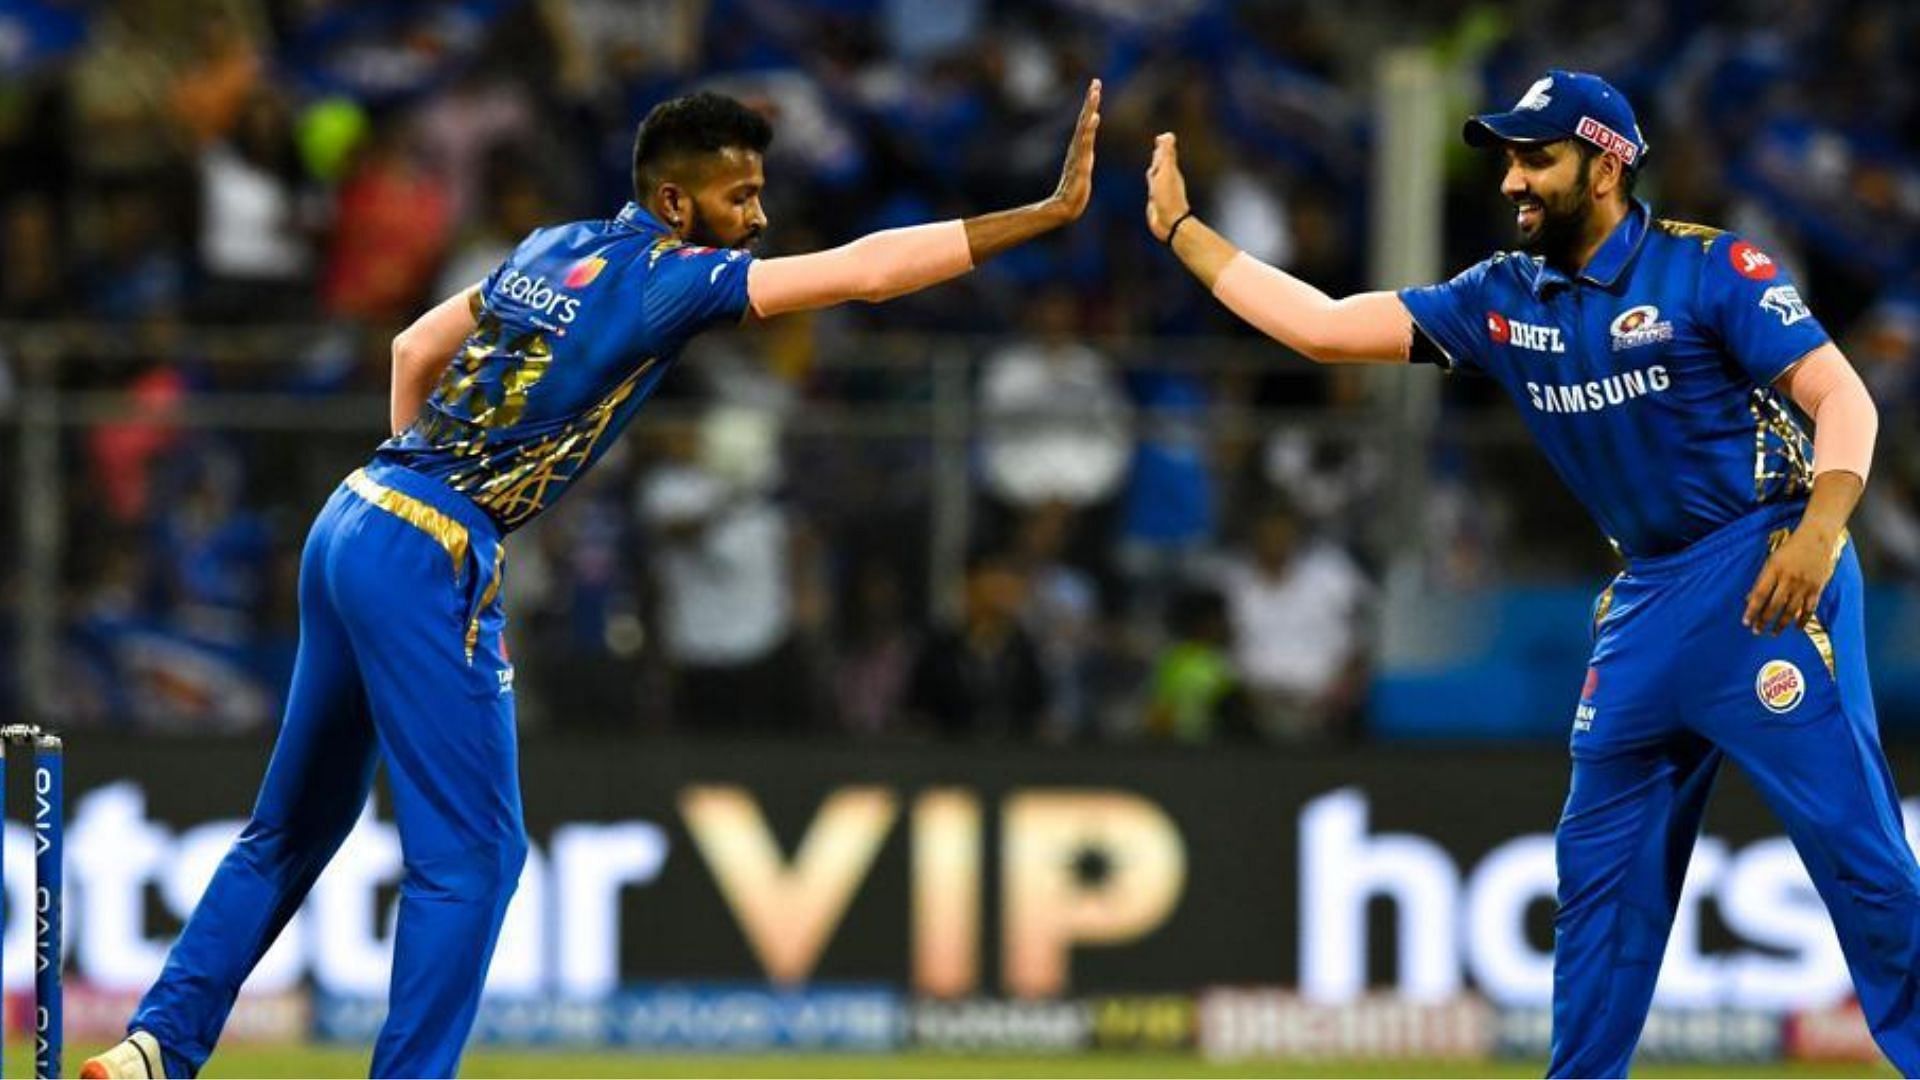 Hardik Pandya being named as captain has met with a largely negative reaction from MI fans (P.C.:X)